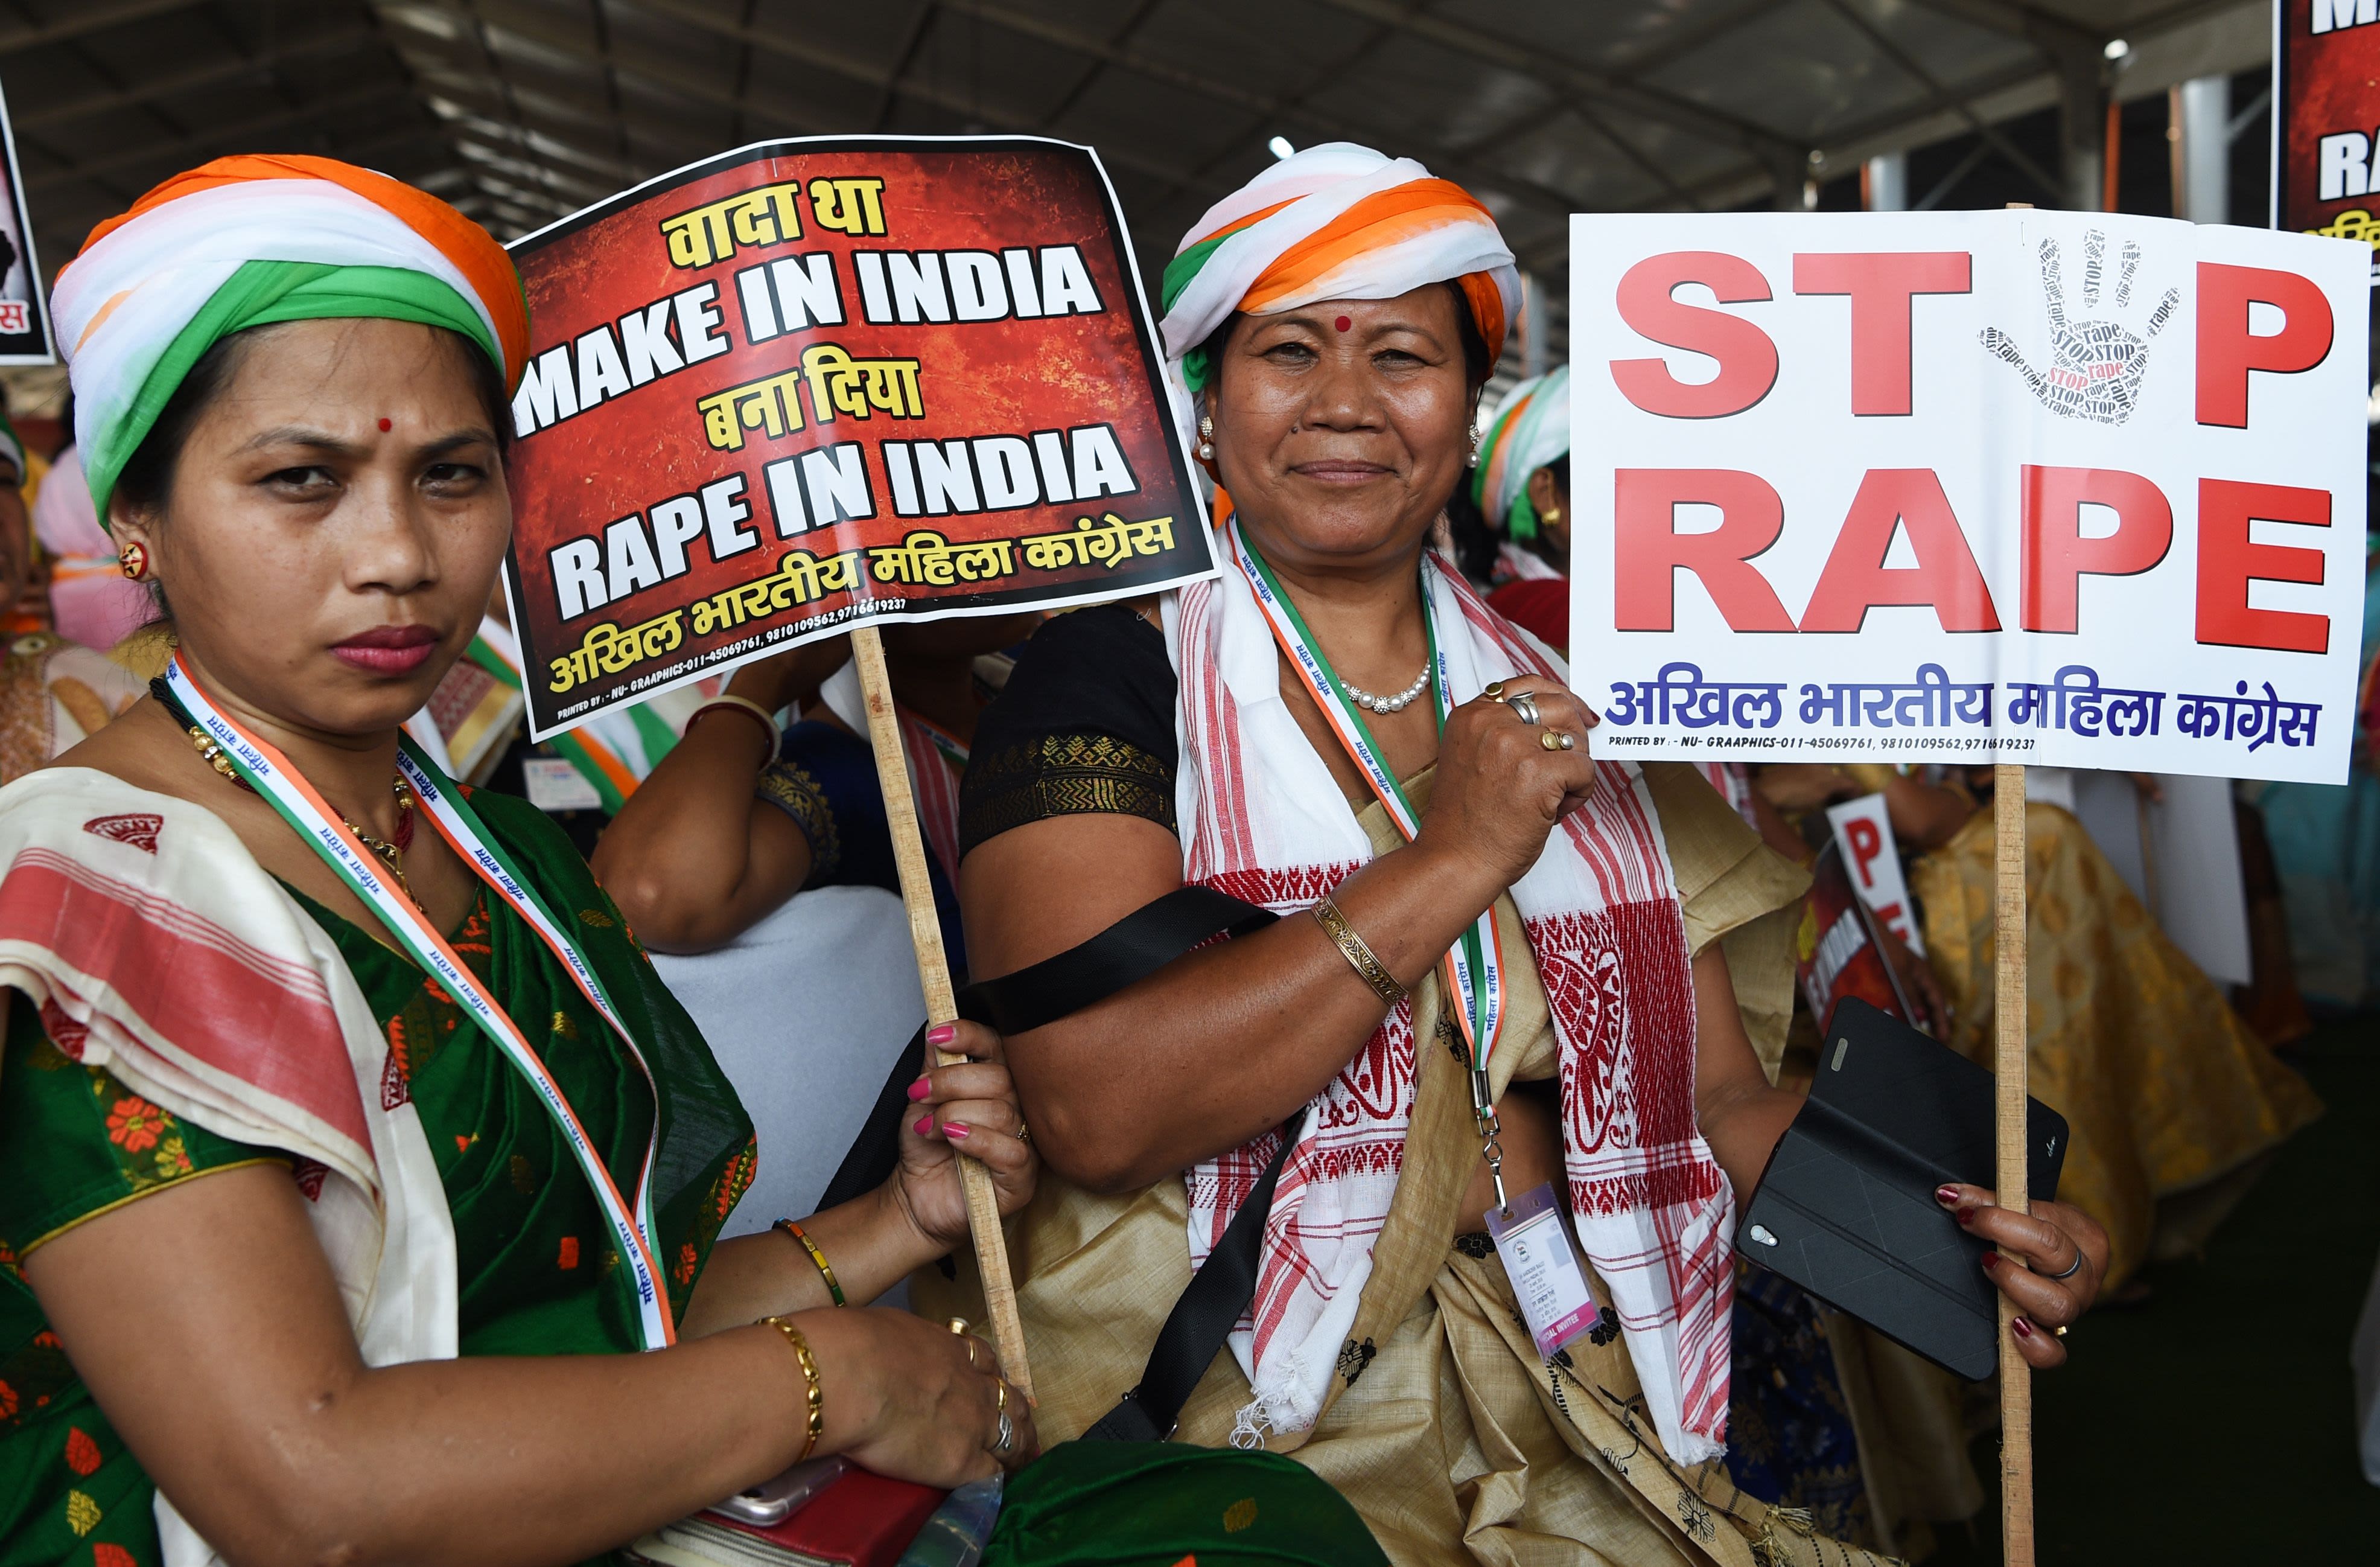 Indiasexmovie - India launches sex offenders registry, amid spate of rape cases | CNN